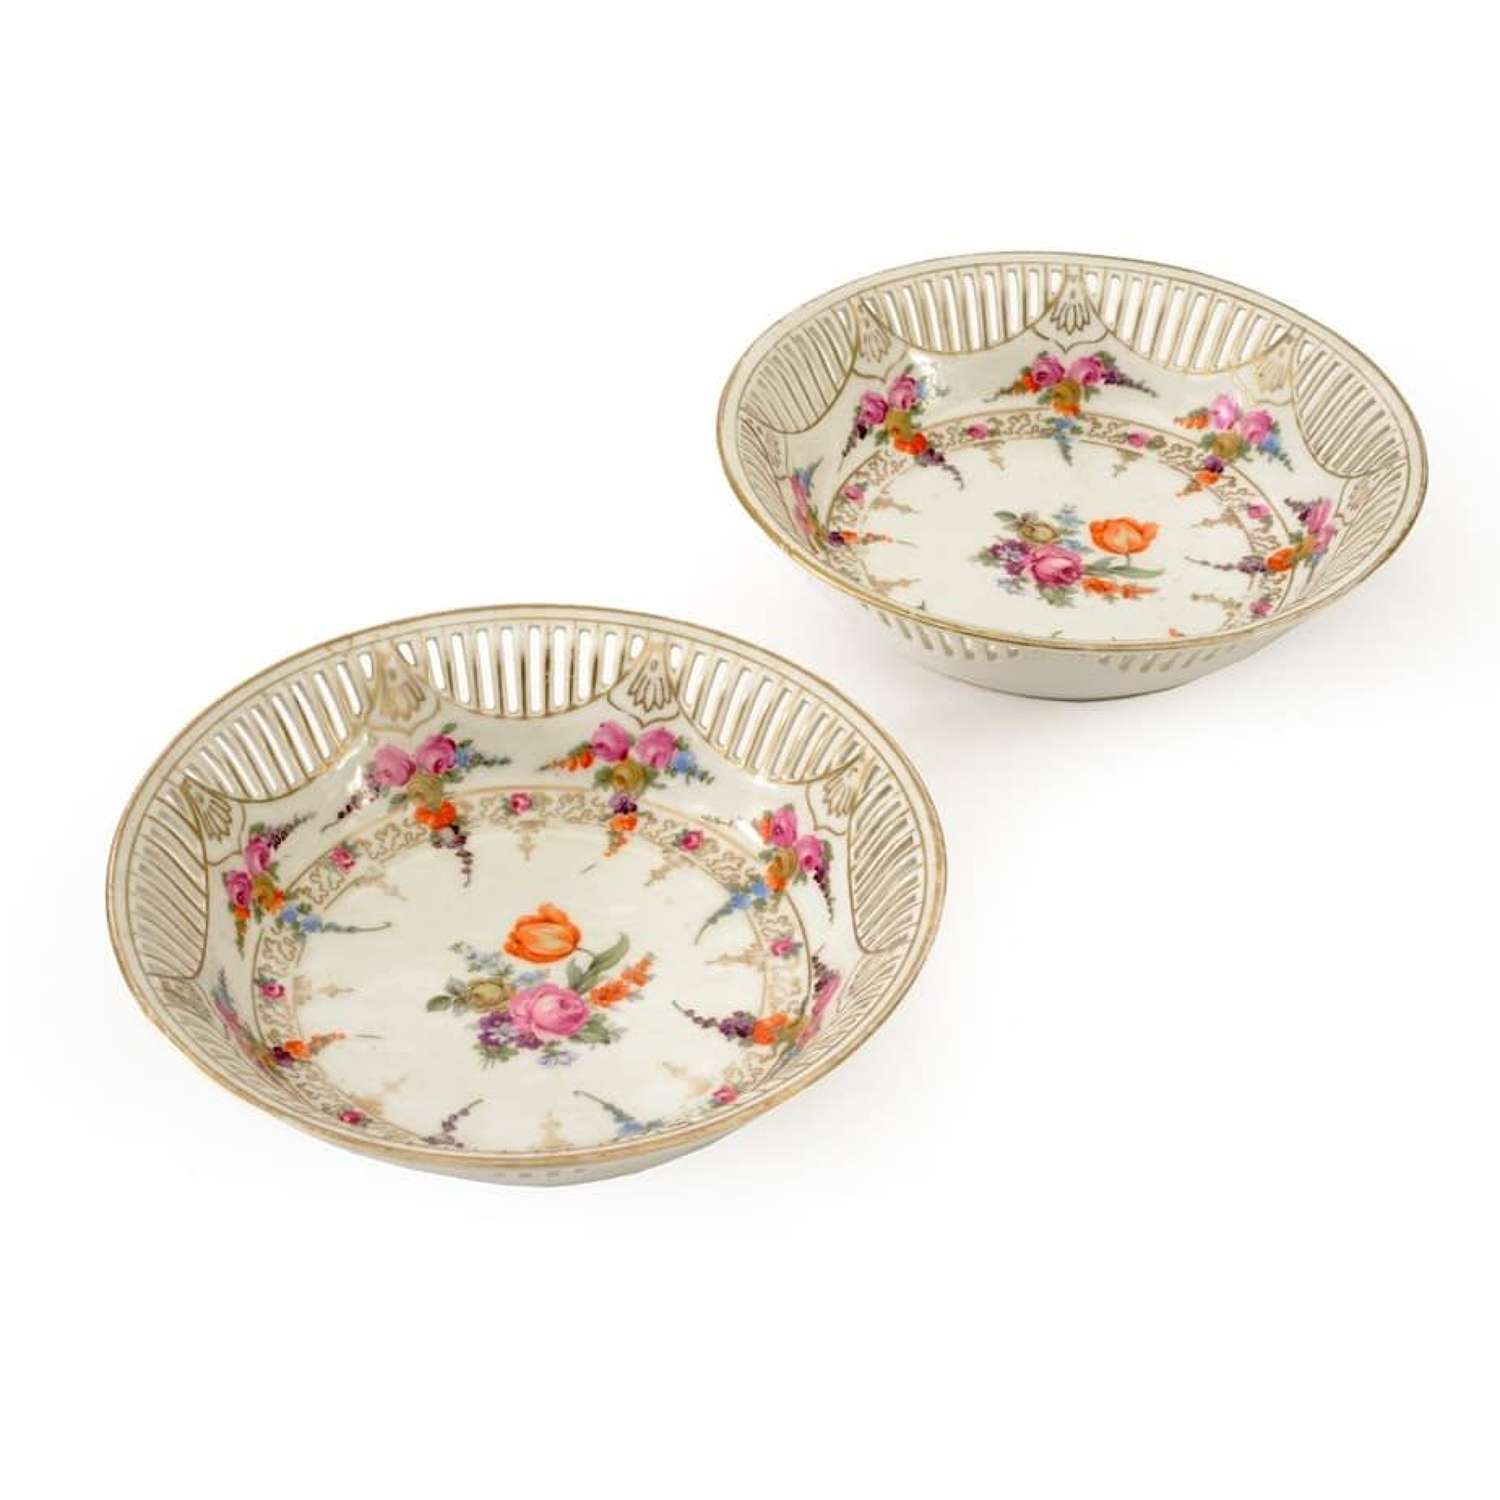 Pair of early 20th Century Continental porcelain hand painted dishes